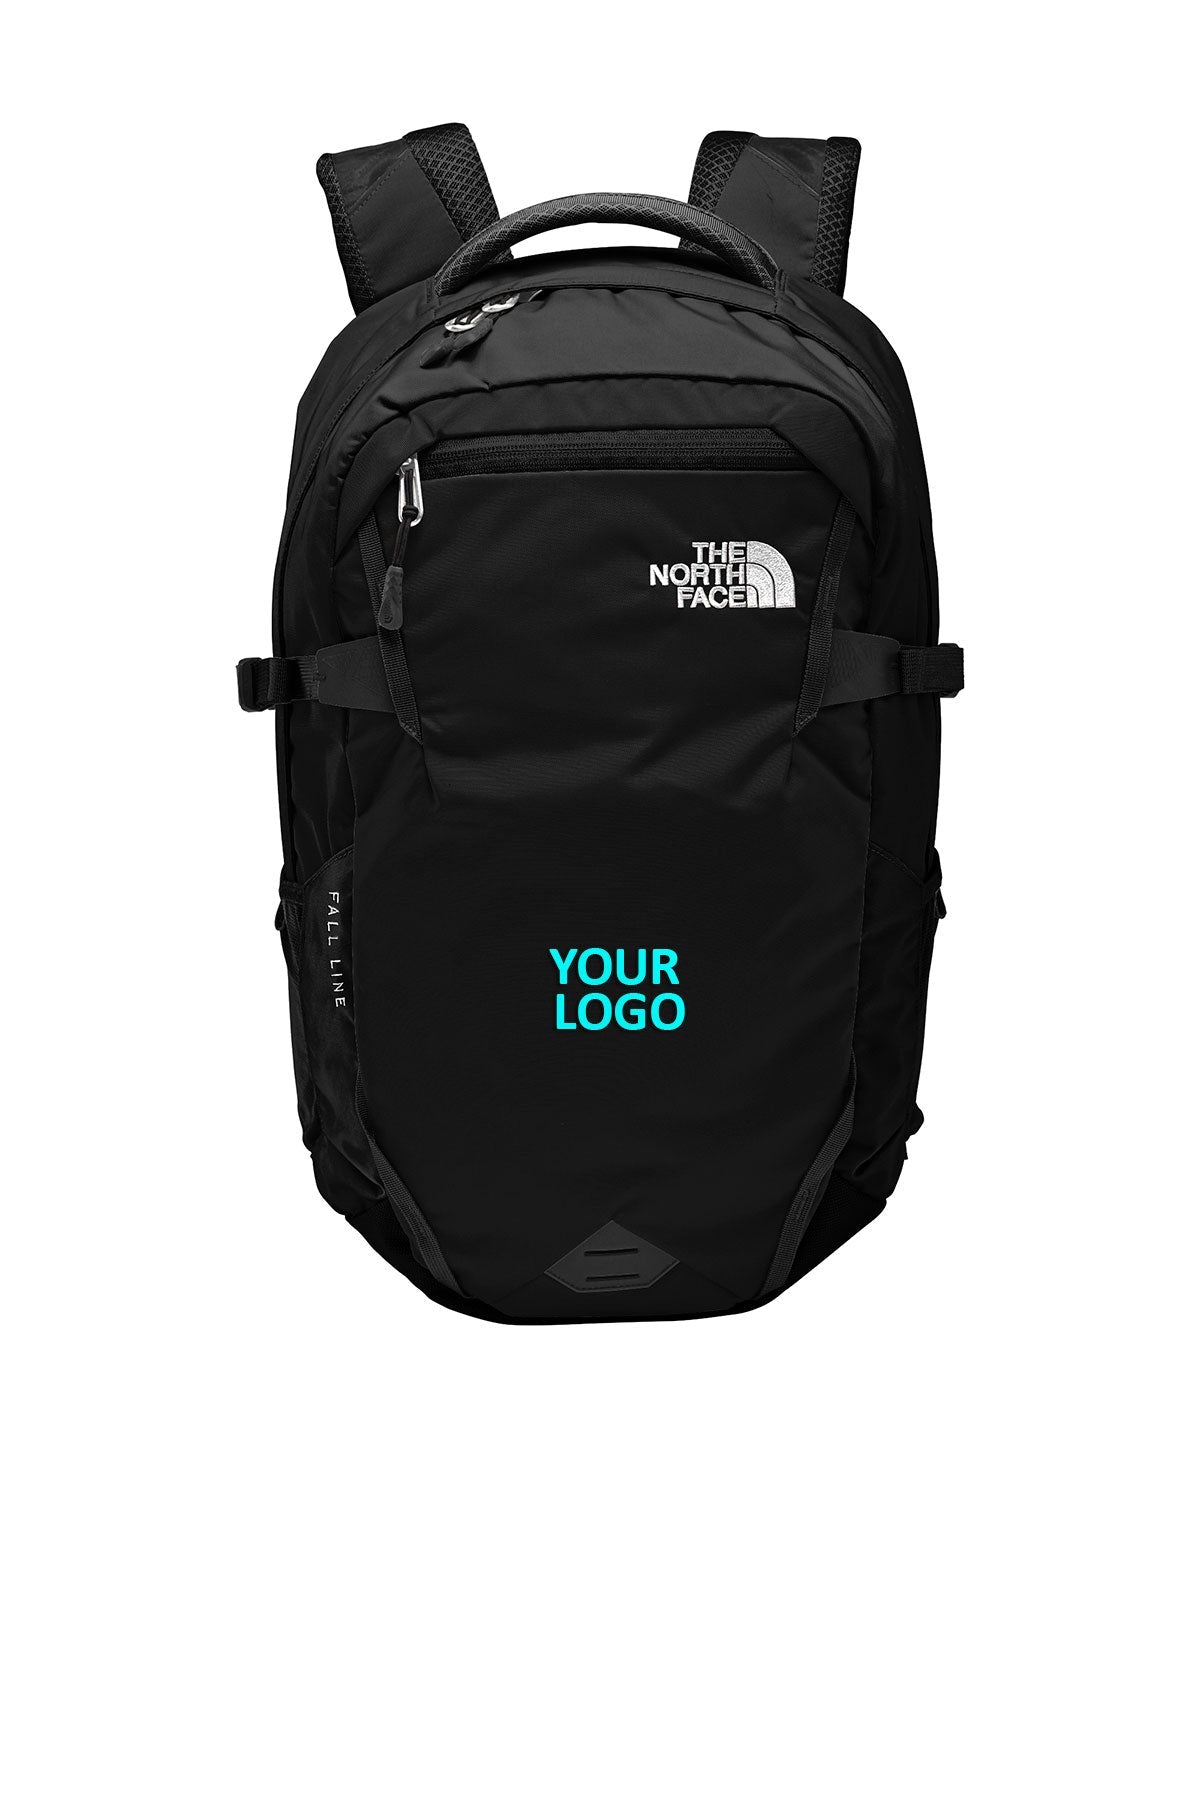 the north face fall line backpack nf0a3kx7 tnf black